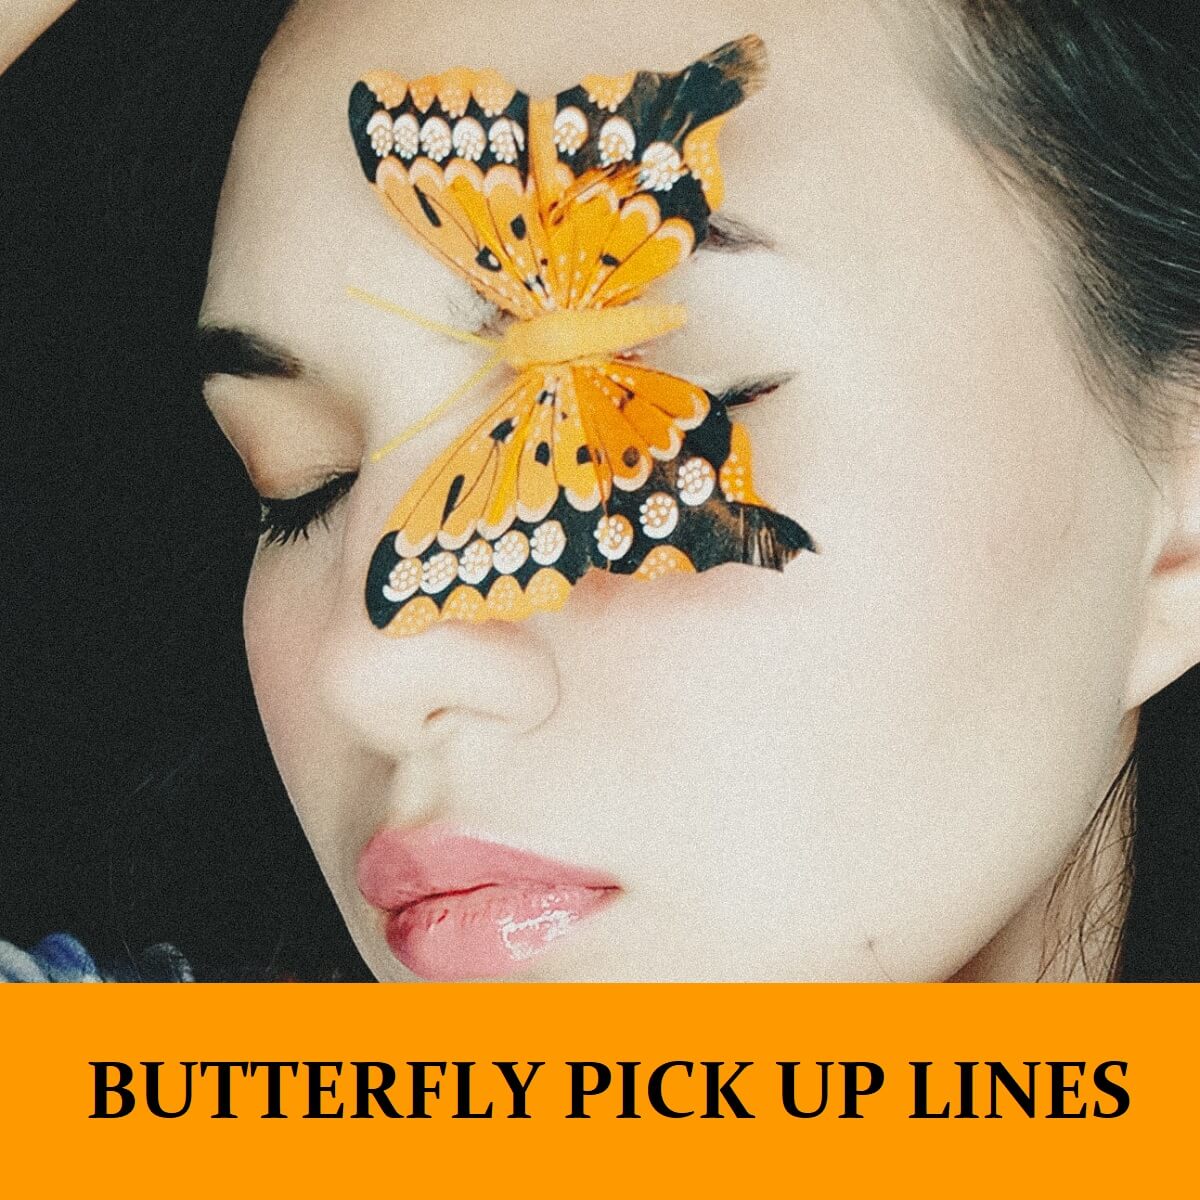 Pick Up Lines About Butterflies